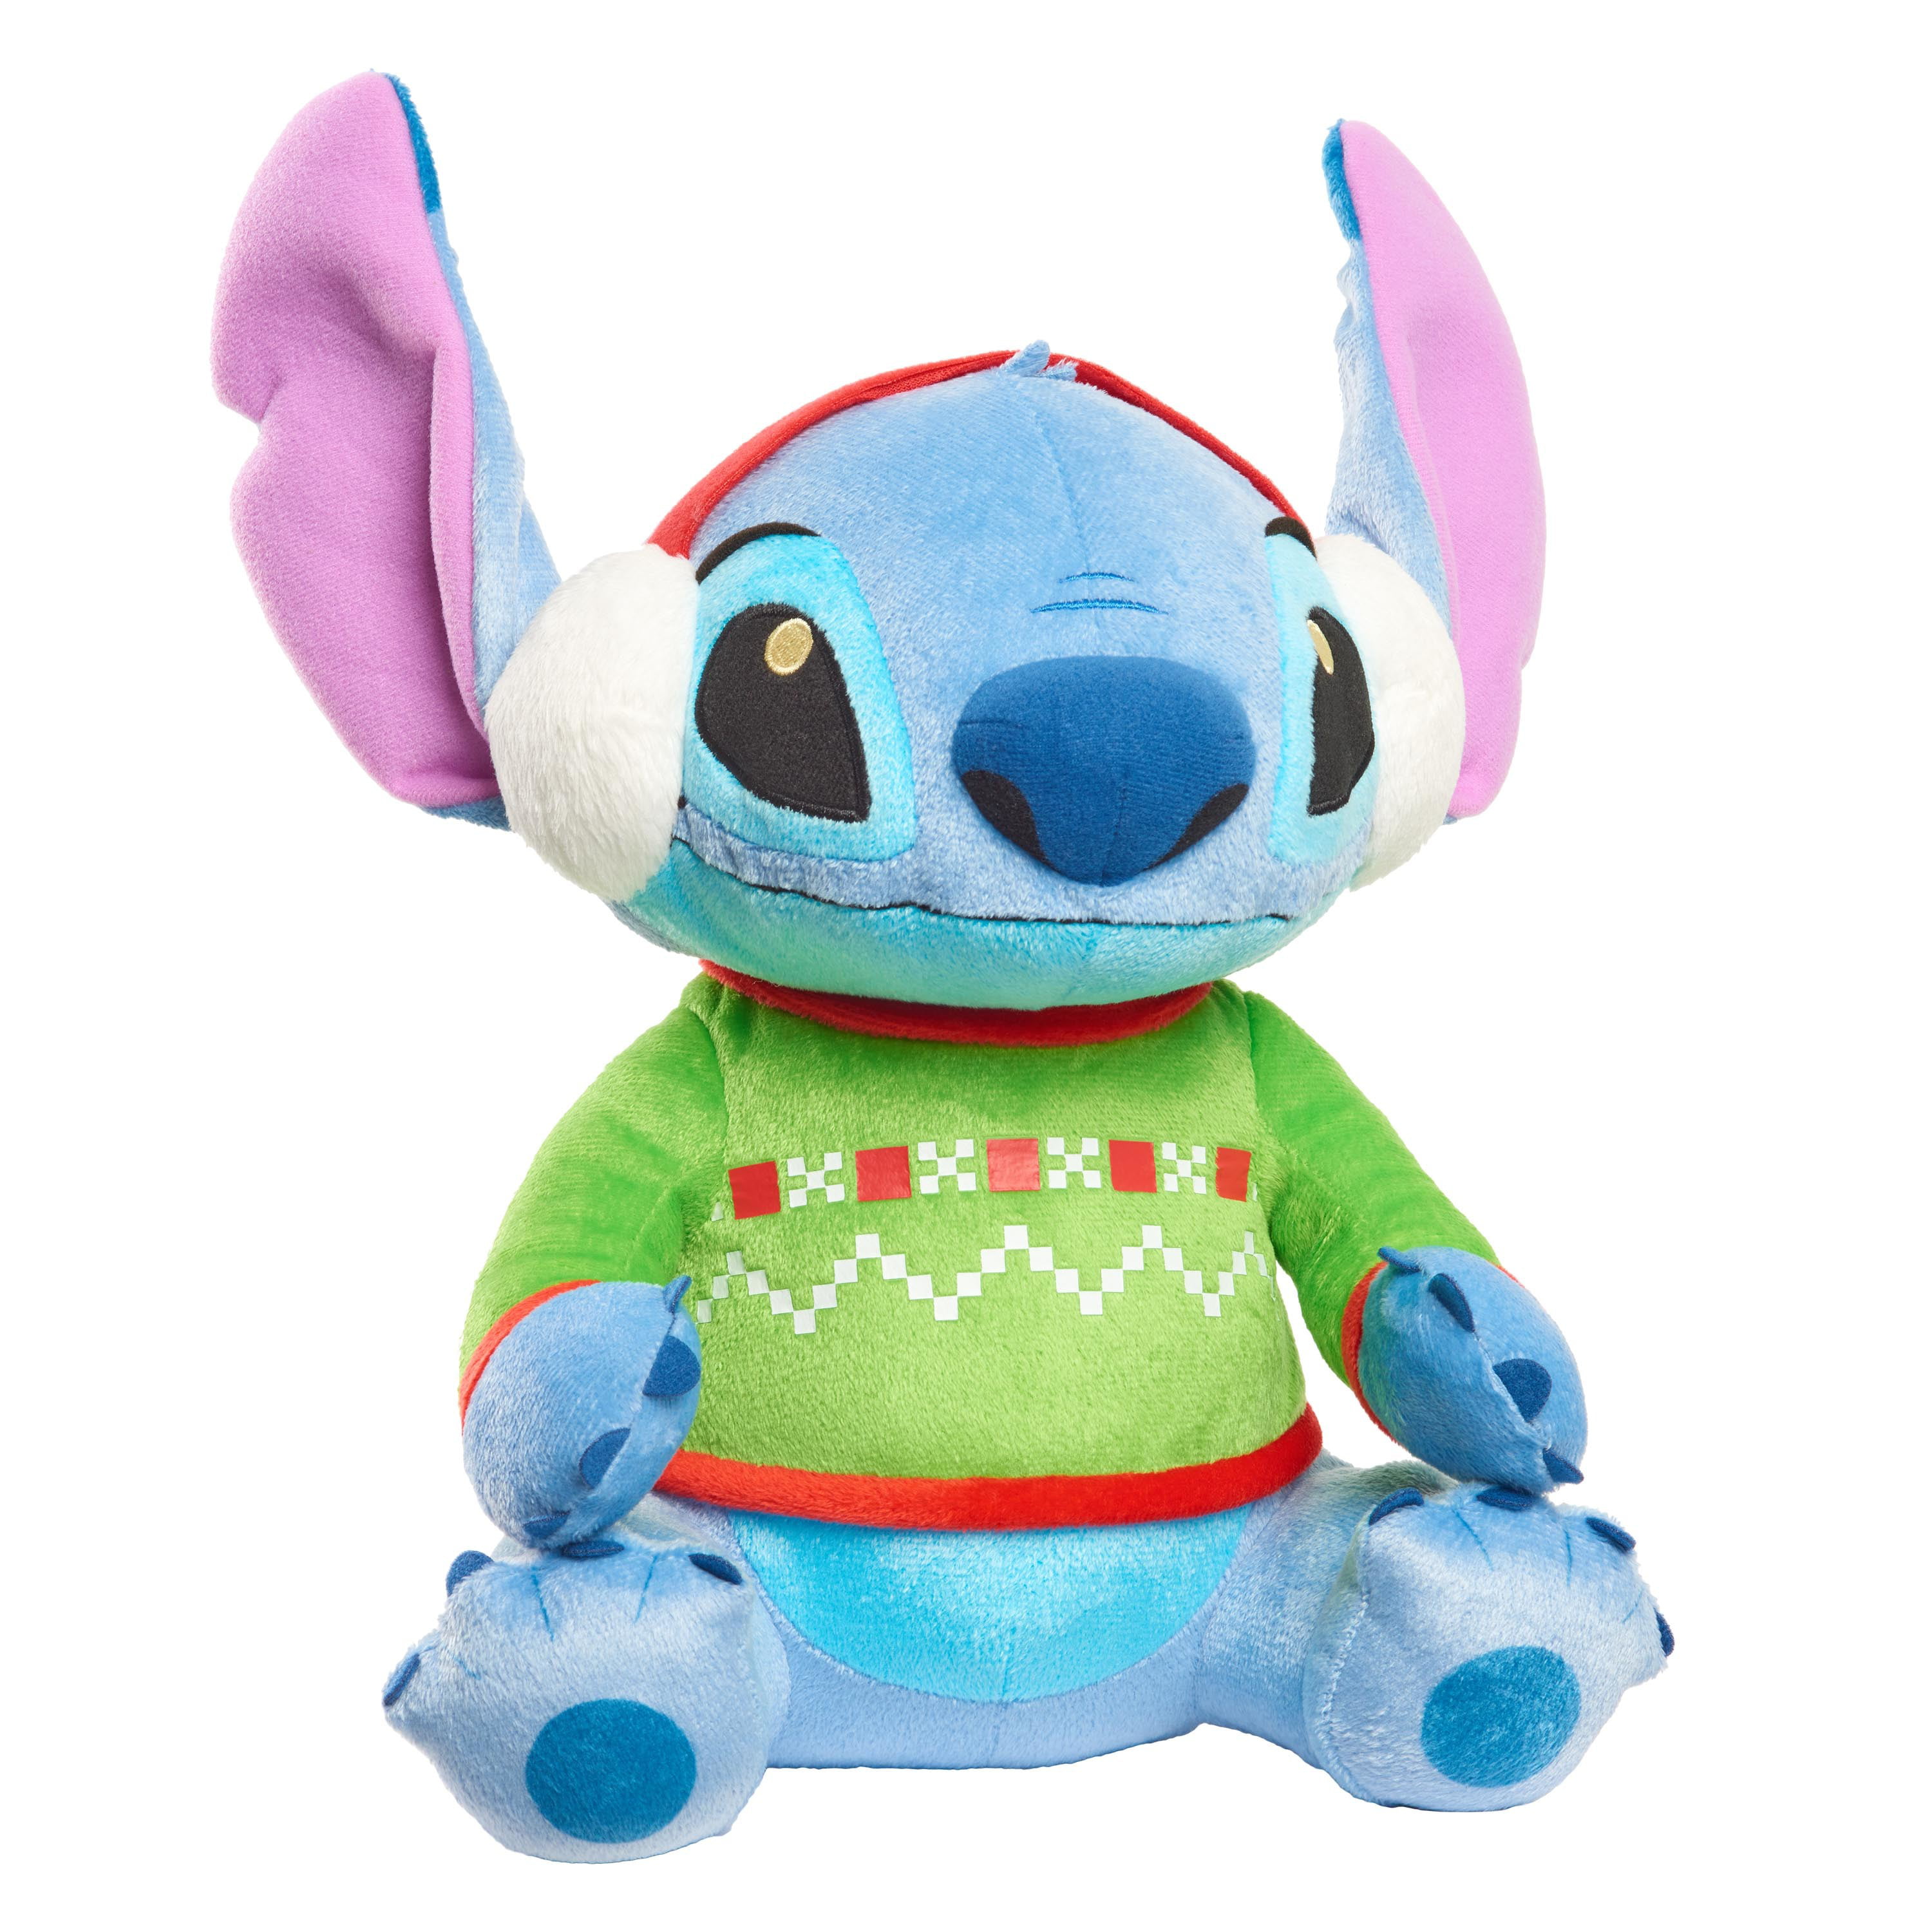 Disney Street Beach Large Plush Stitch, 17-Inch Stuffed Animal, Alien,  Disney's Lilo and Stitch, Officially Licensed Kids Toys for Ages 2 Up